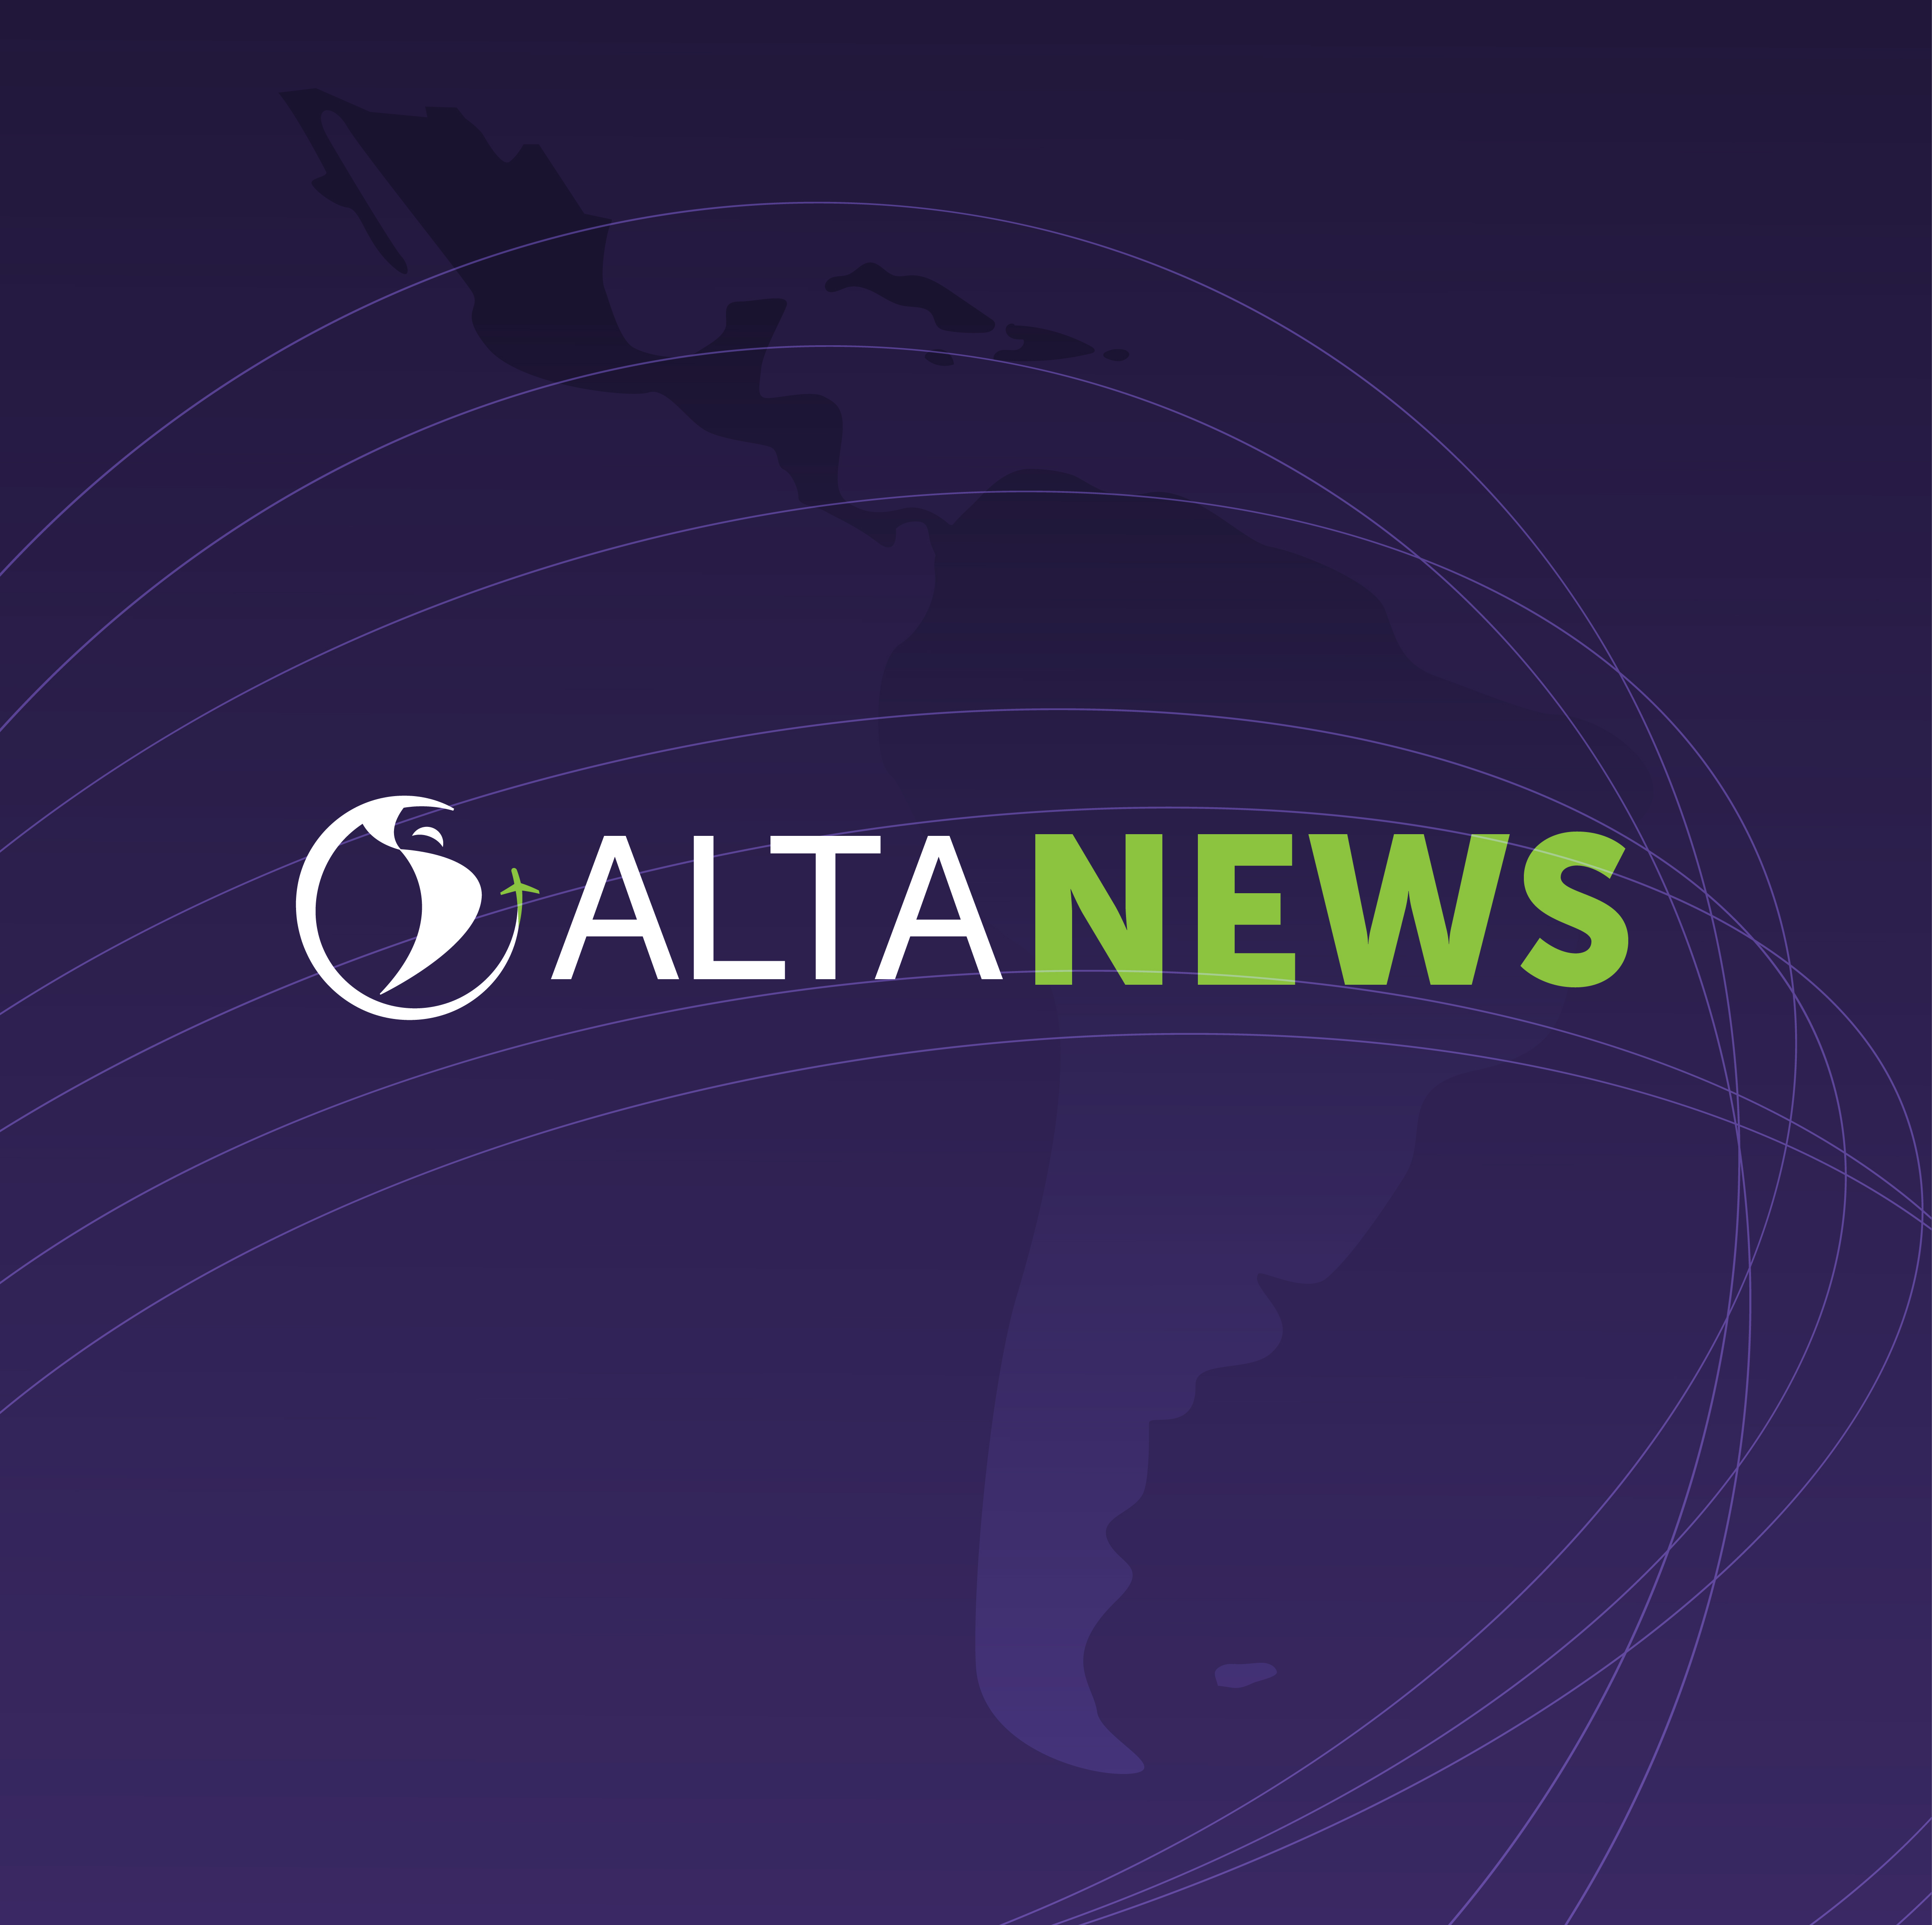 ALTA NEWS - Latin American and Caribbean airlines have achieved annual fuel efficiency of 2.7%